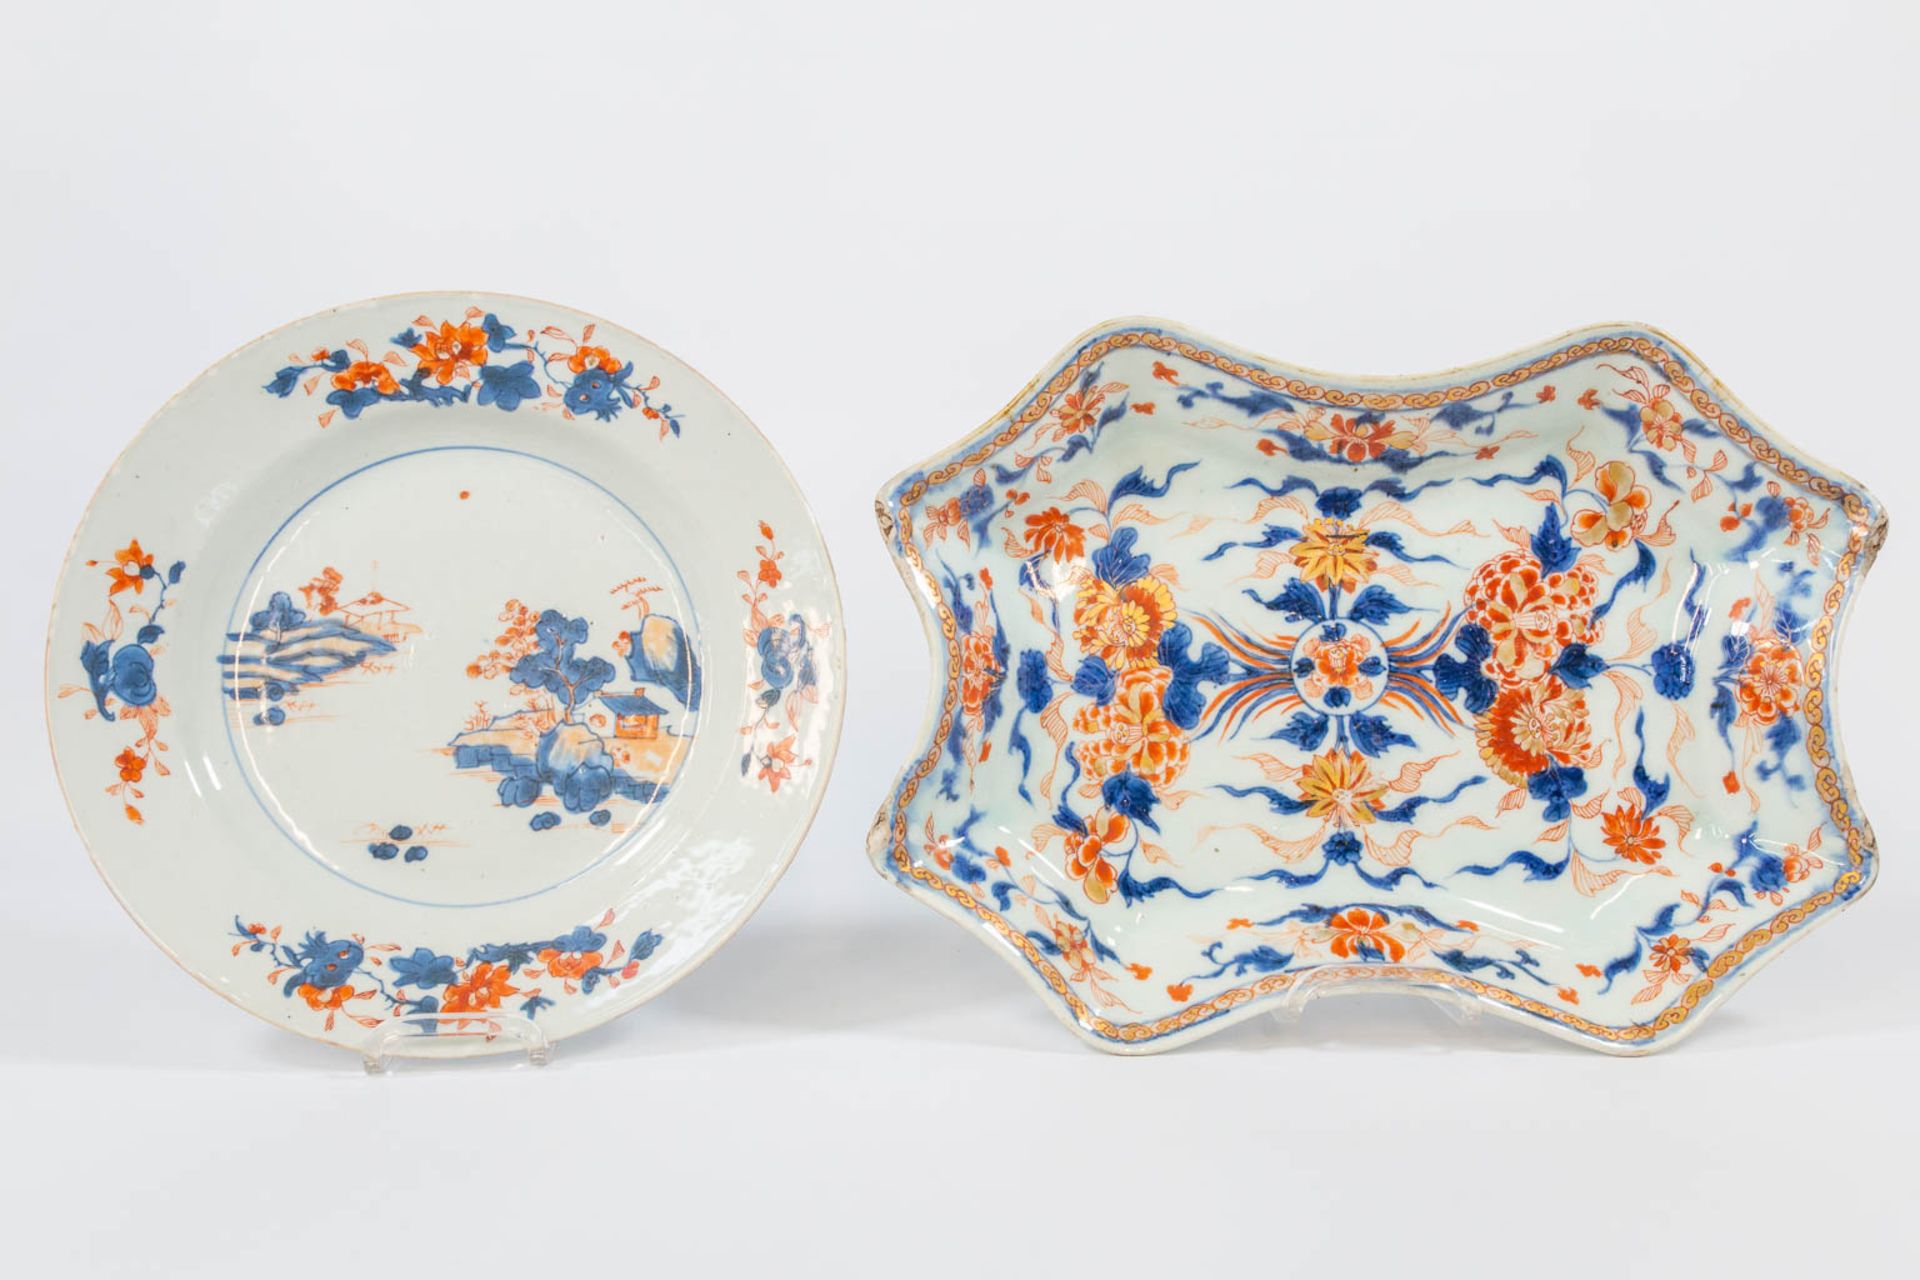 A collection of 6 famille rose objects and plates, made of porcelain. - Image 23 of 24